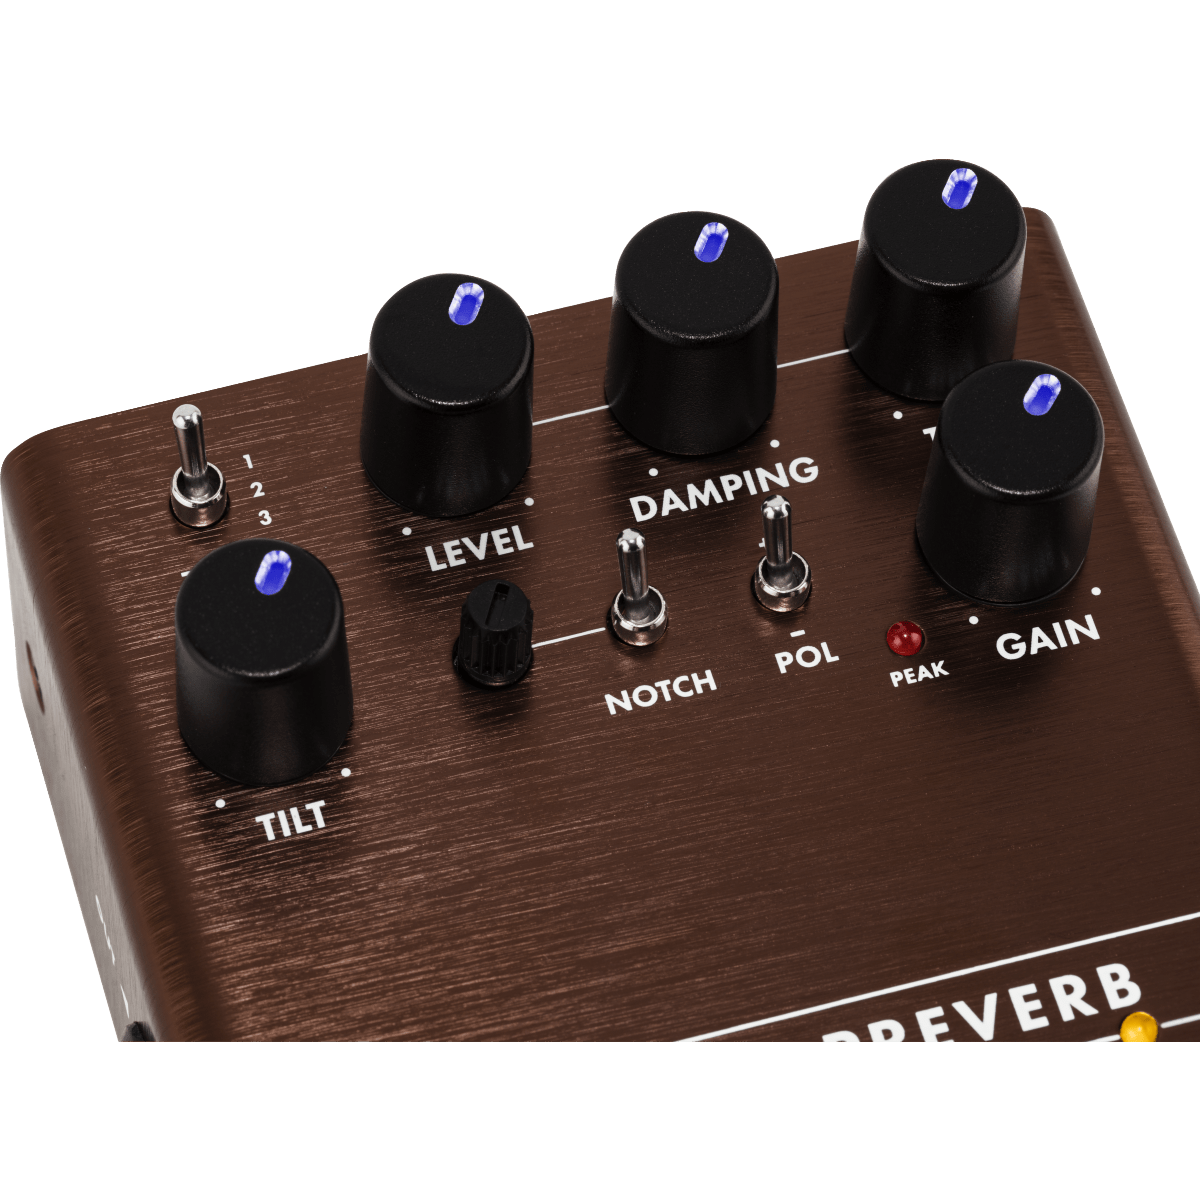 Fender Effects Fender Acoustic Preverb Preamp and Reverb Effect Pedal - Byron Music